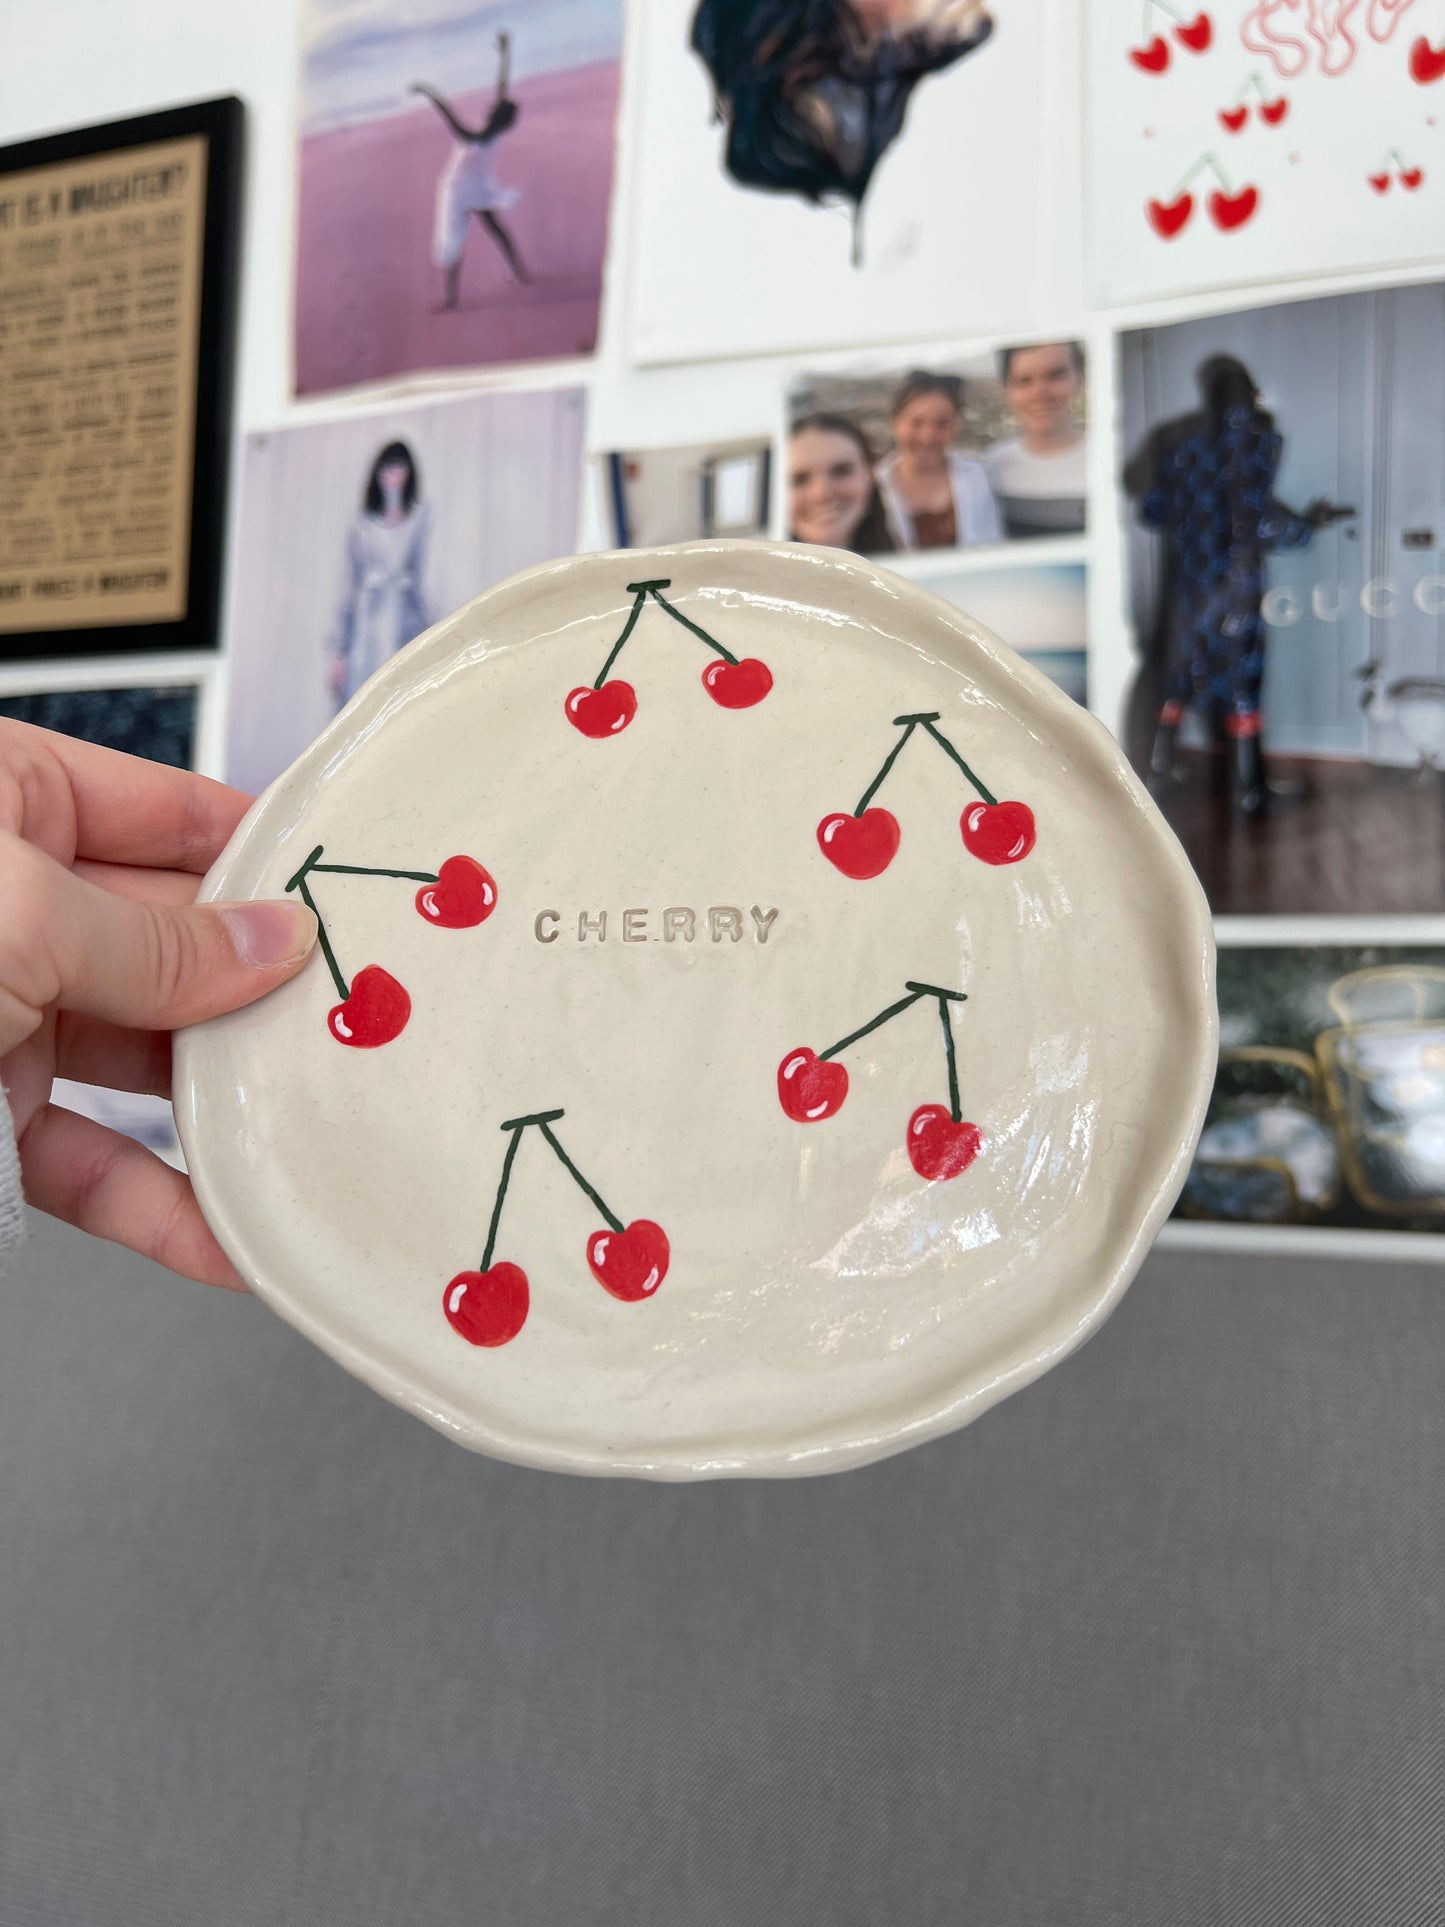 The cherry plate